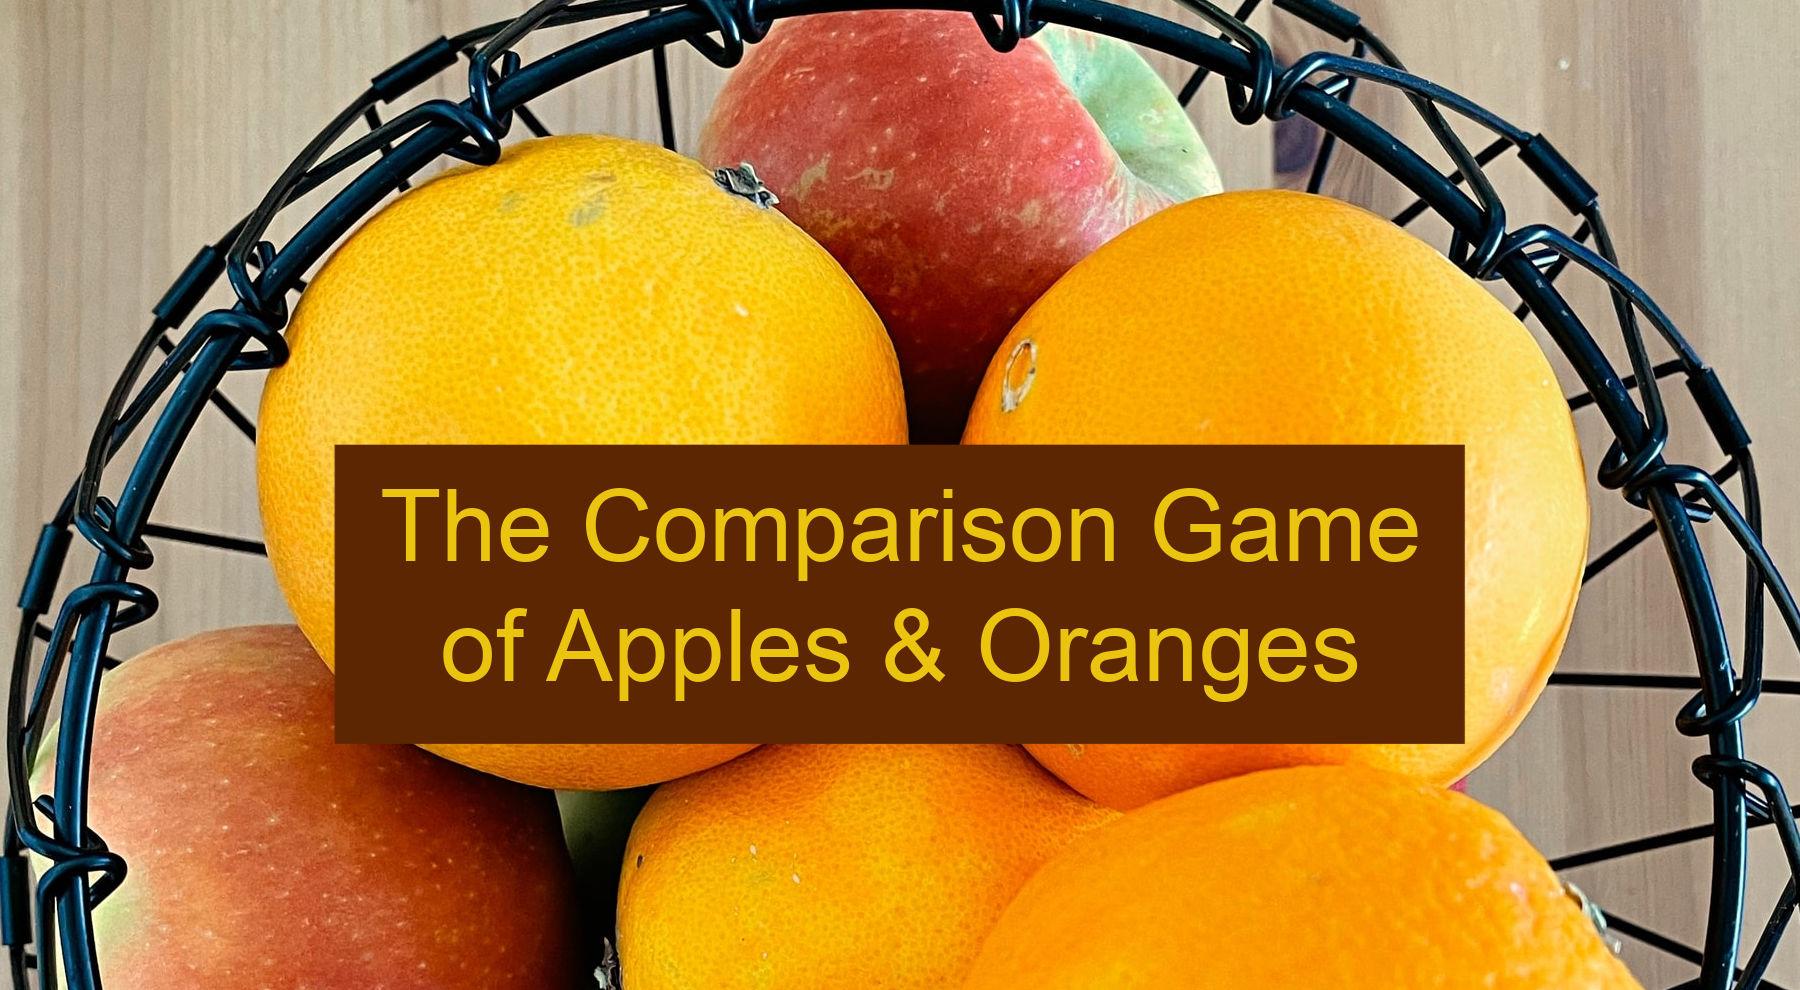 Comparing Apples to Apples--the best for eating & cooking